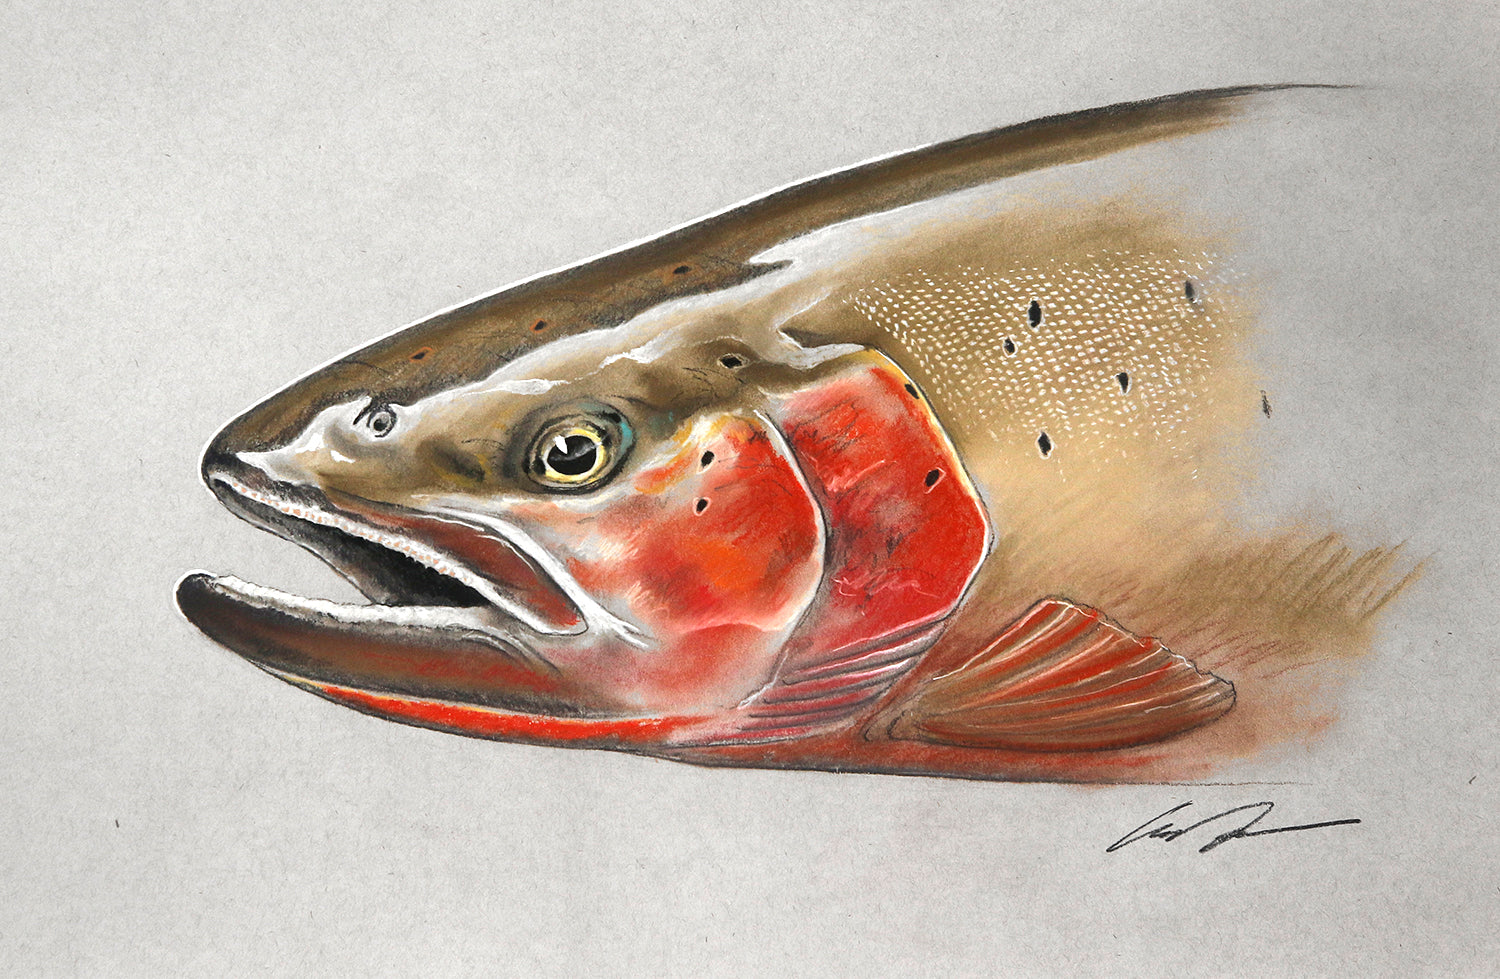 An original drawing of a close up of a cutthroat trout face